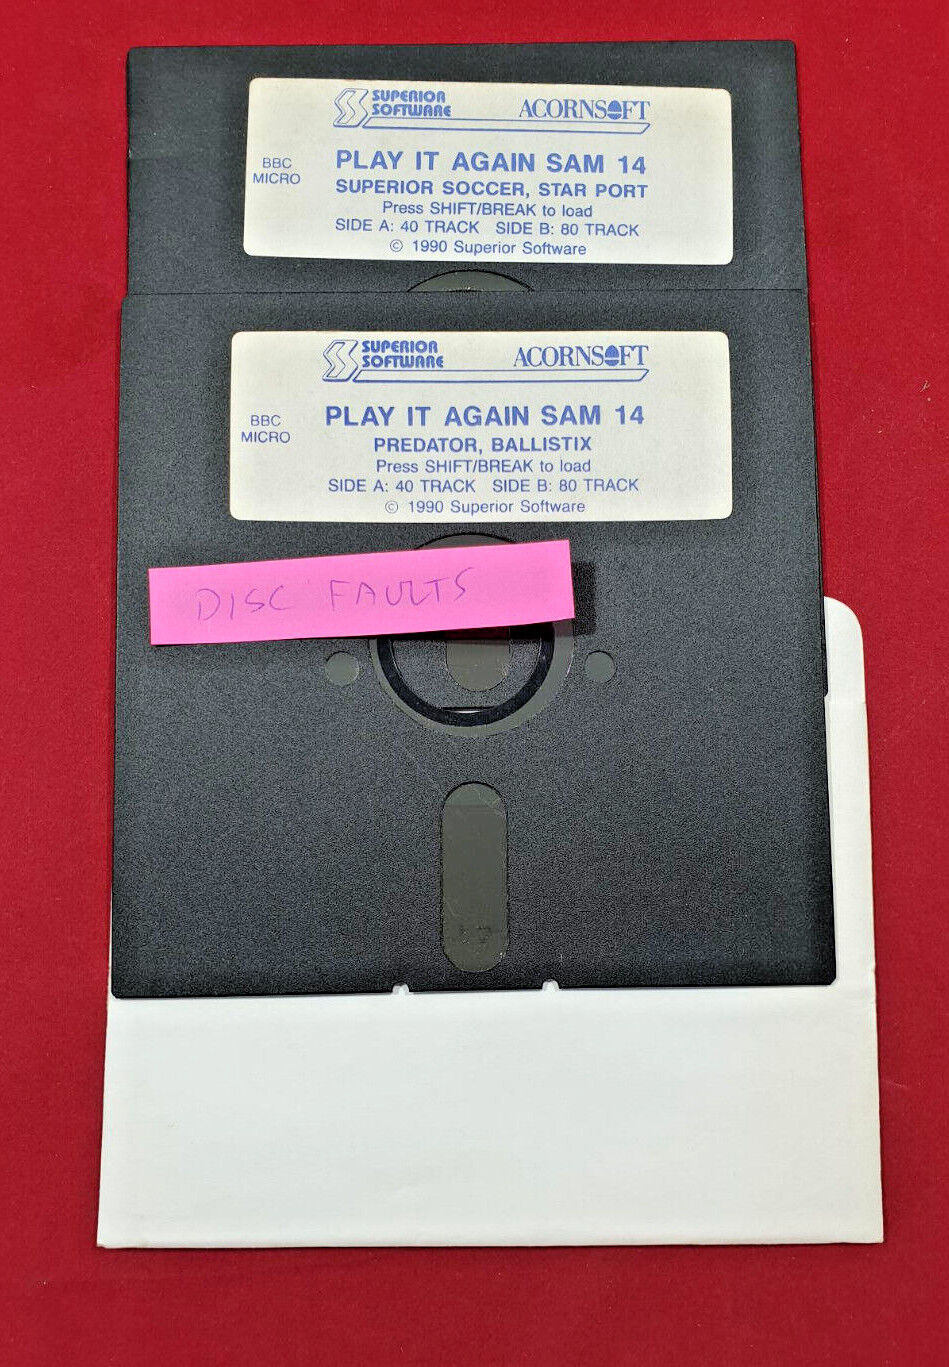 Acornsoft Play It Again Sam 14 Software Disc with disc Faults for BBC Micro